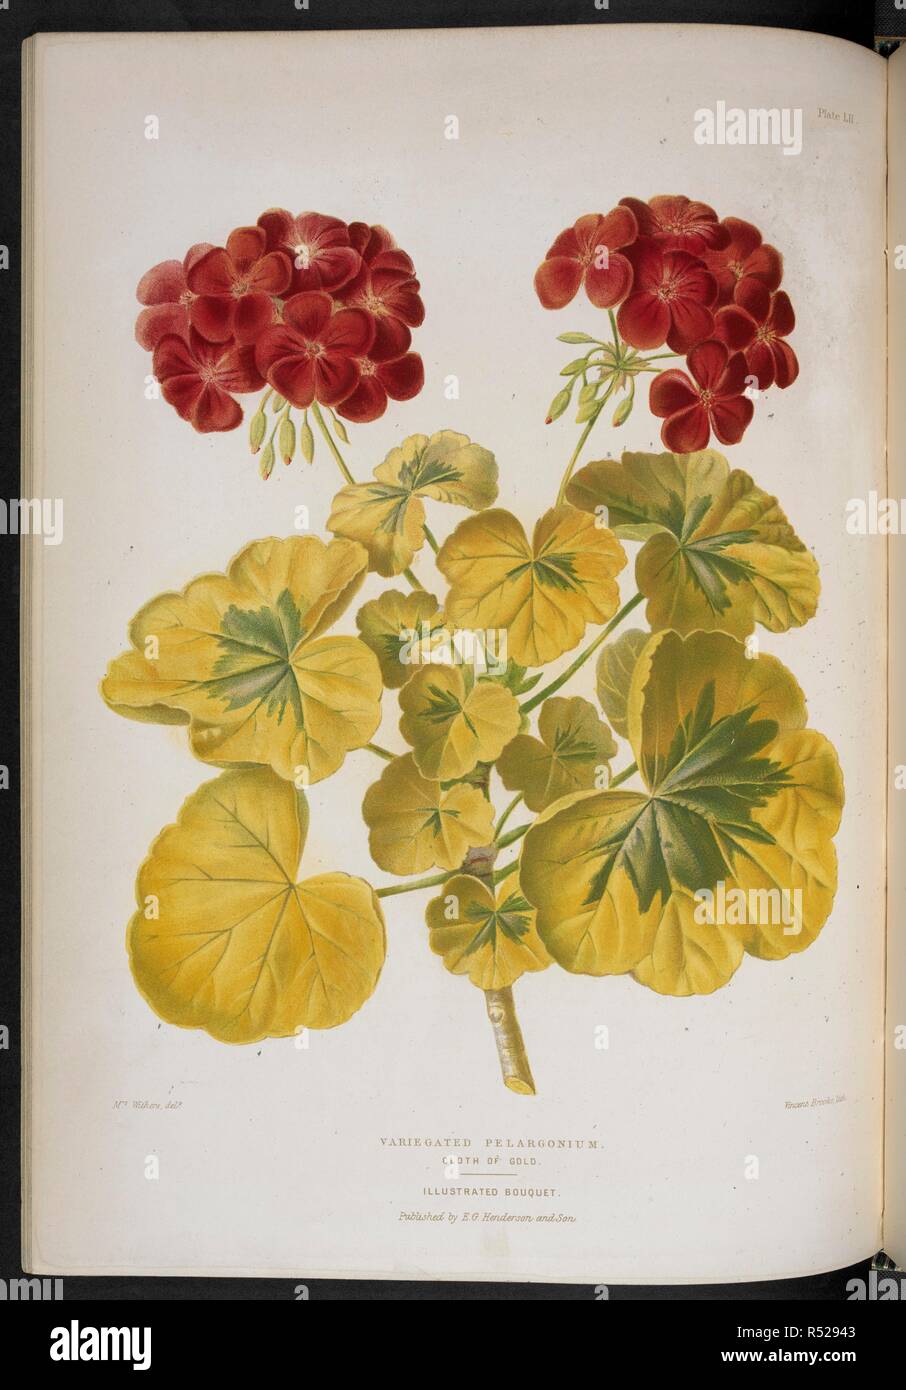 Variegated Pelargonium: Cloth of Gold. Geranium. The Illustrated Bouquet, consisting of figures, with descriptions of new flowers. London, 1857-64. Source: 1823.c.13 plate 52. Author: Henderson, Edward George. Withers, Mrs. Stock Photo